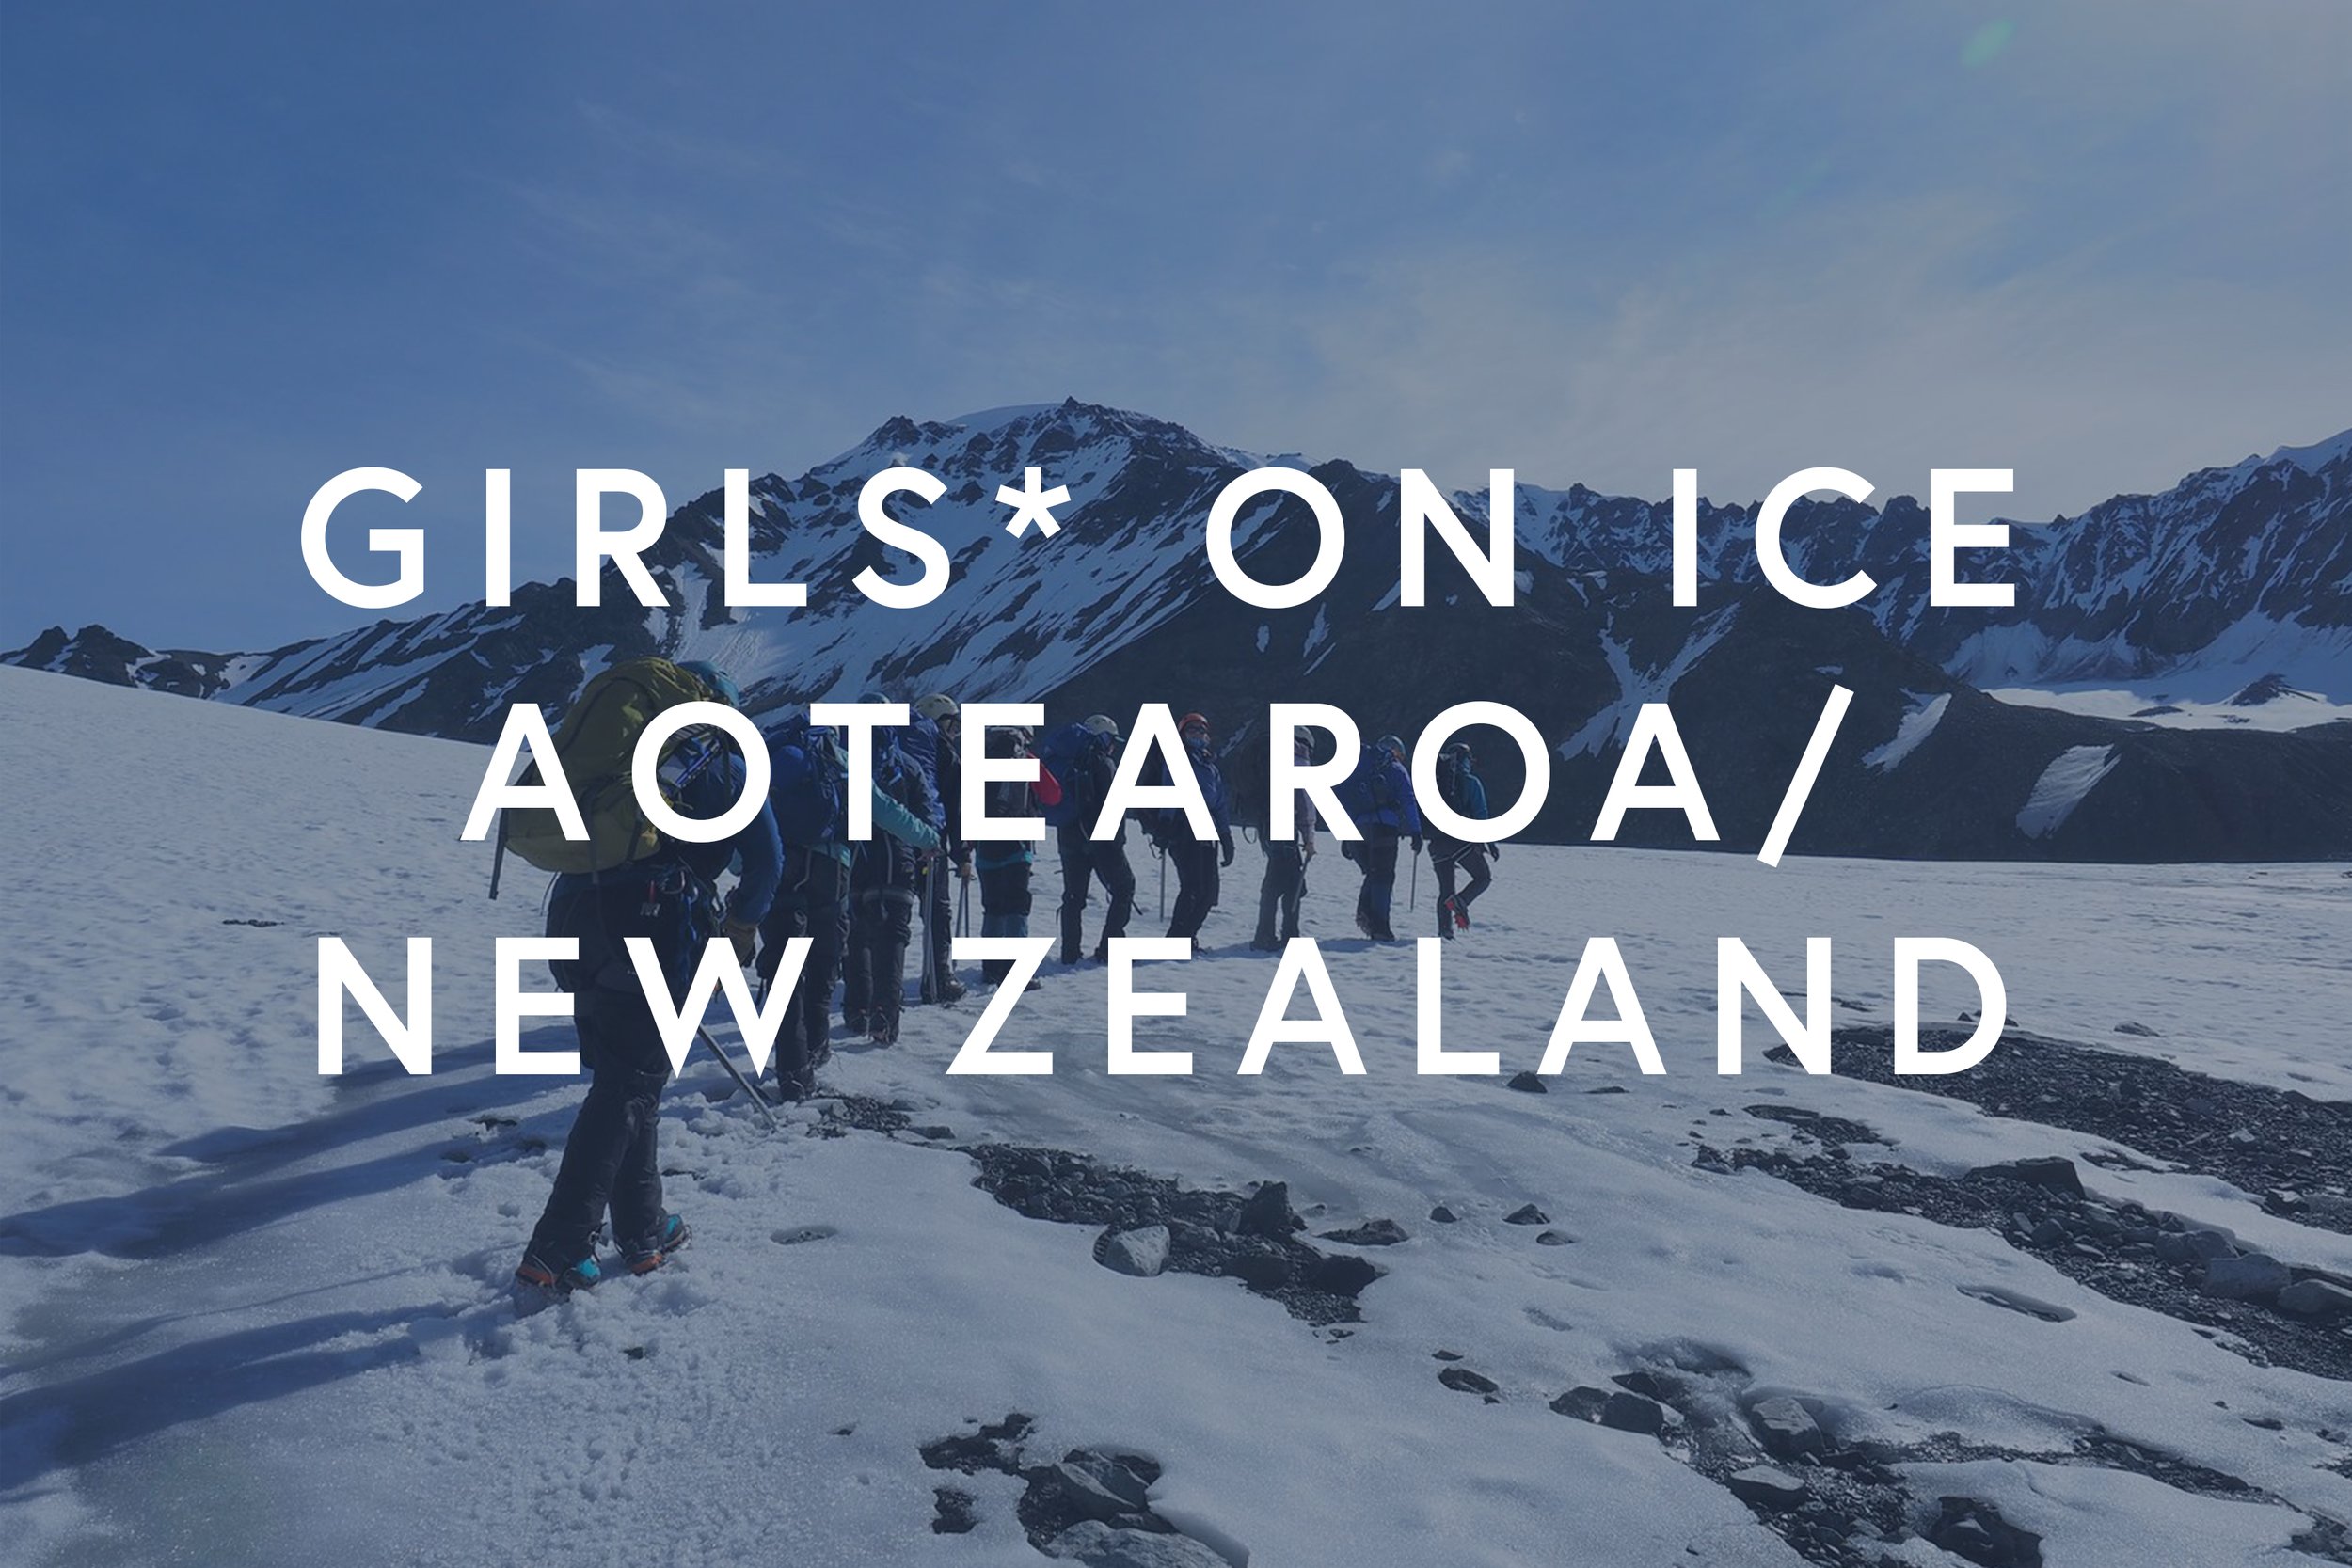 Image links to the Girls* on Ice New Zealand/ Aotearoa branch webpage